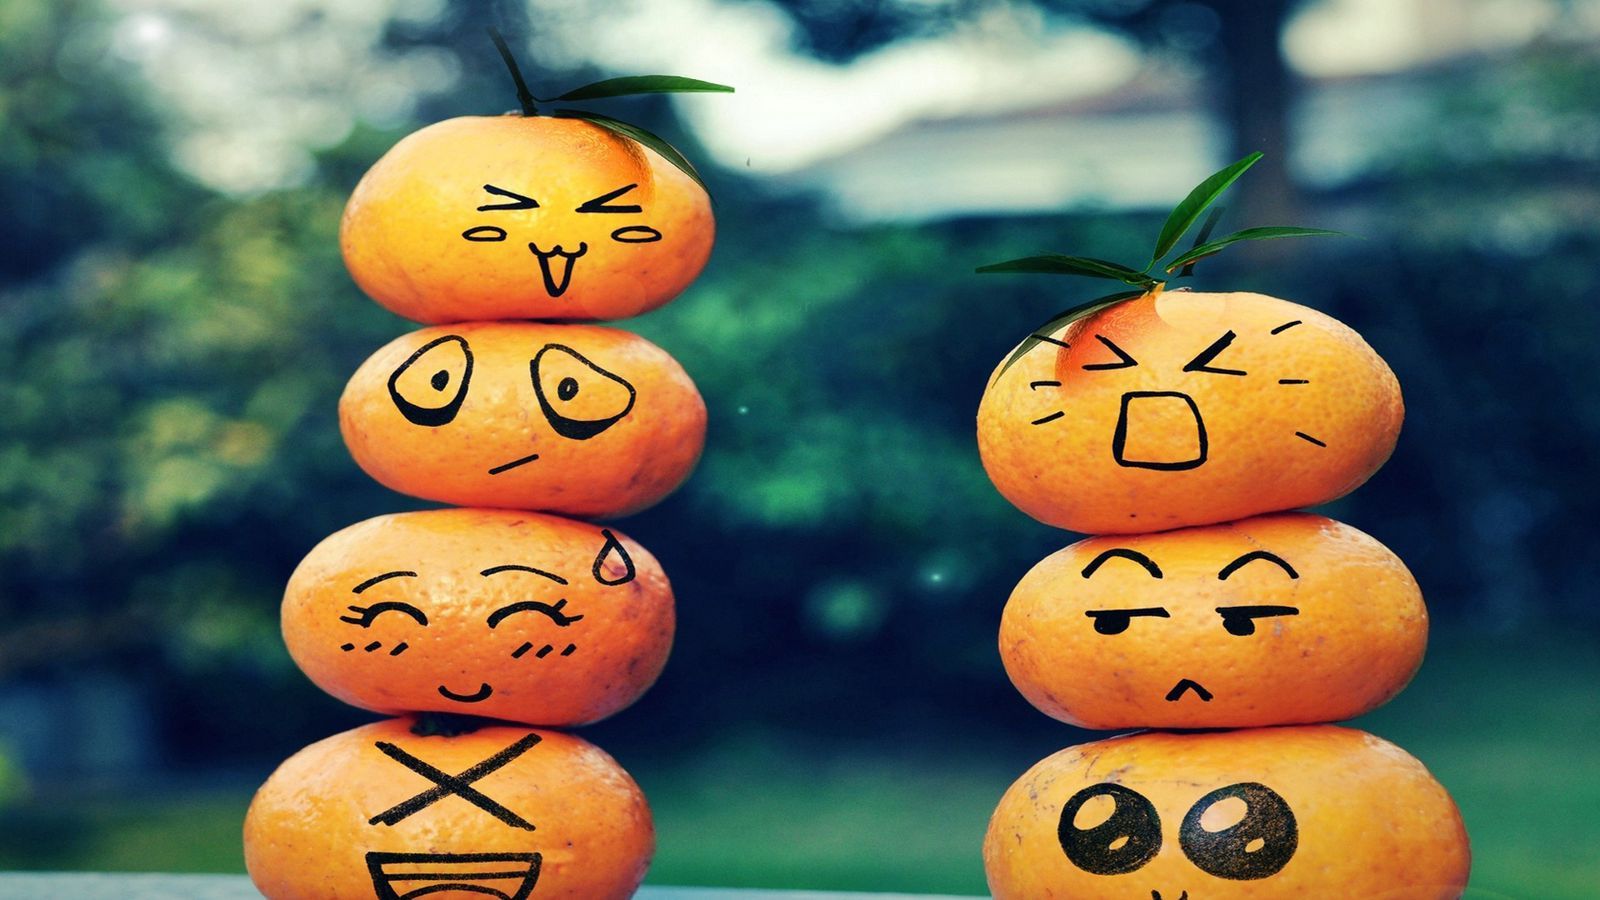 Download wallpaper 1600x900 fruit, emoticons, smiley face, table